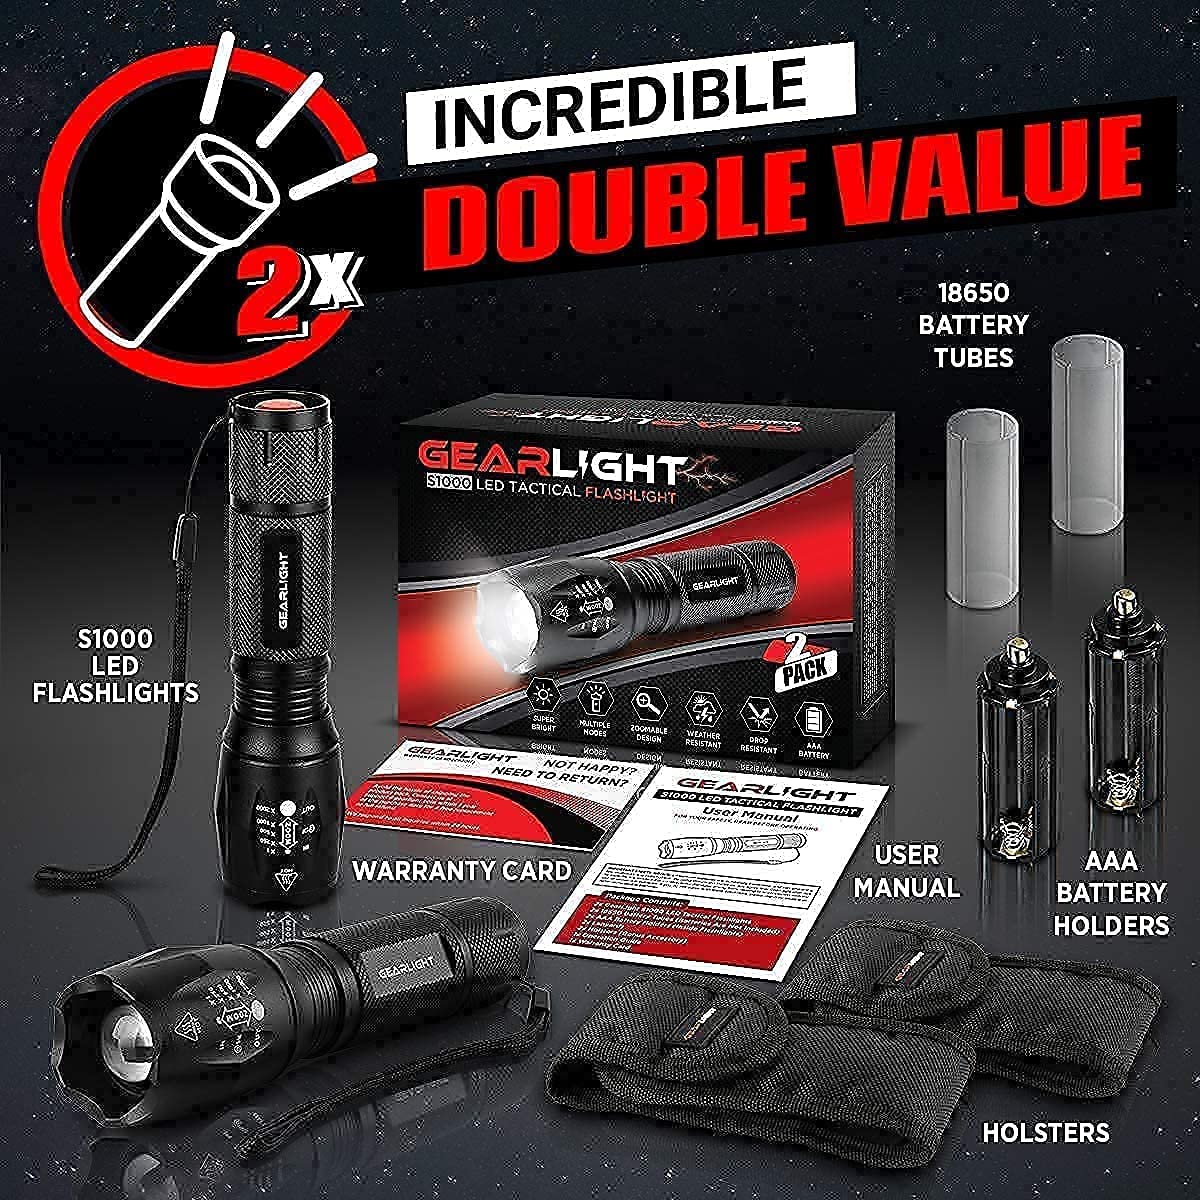 GearLight S1000 LED Tactical Flashlight with Holster [2 Pack] + GearLight Sunlit Lantern with Magnetic Base [2 Pack]